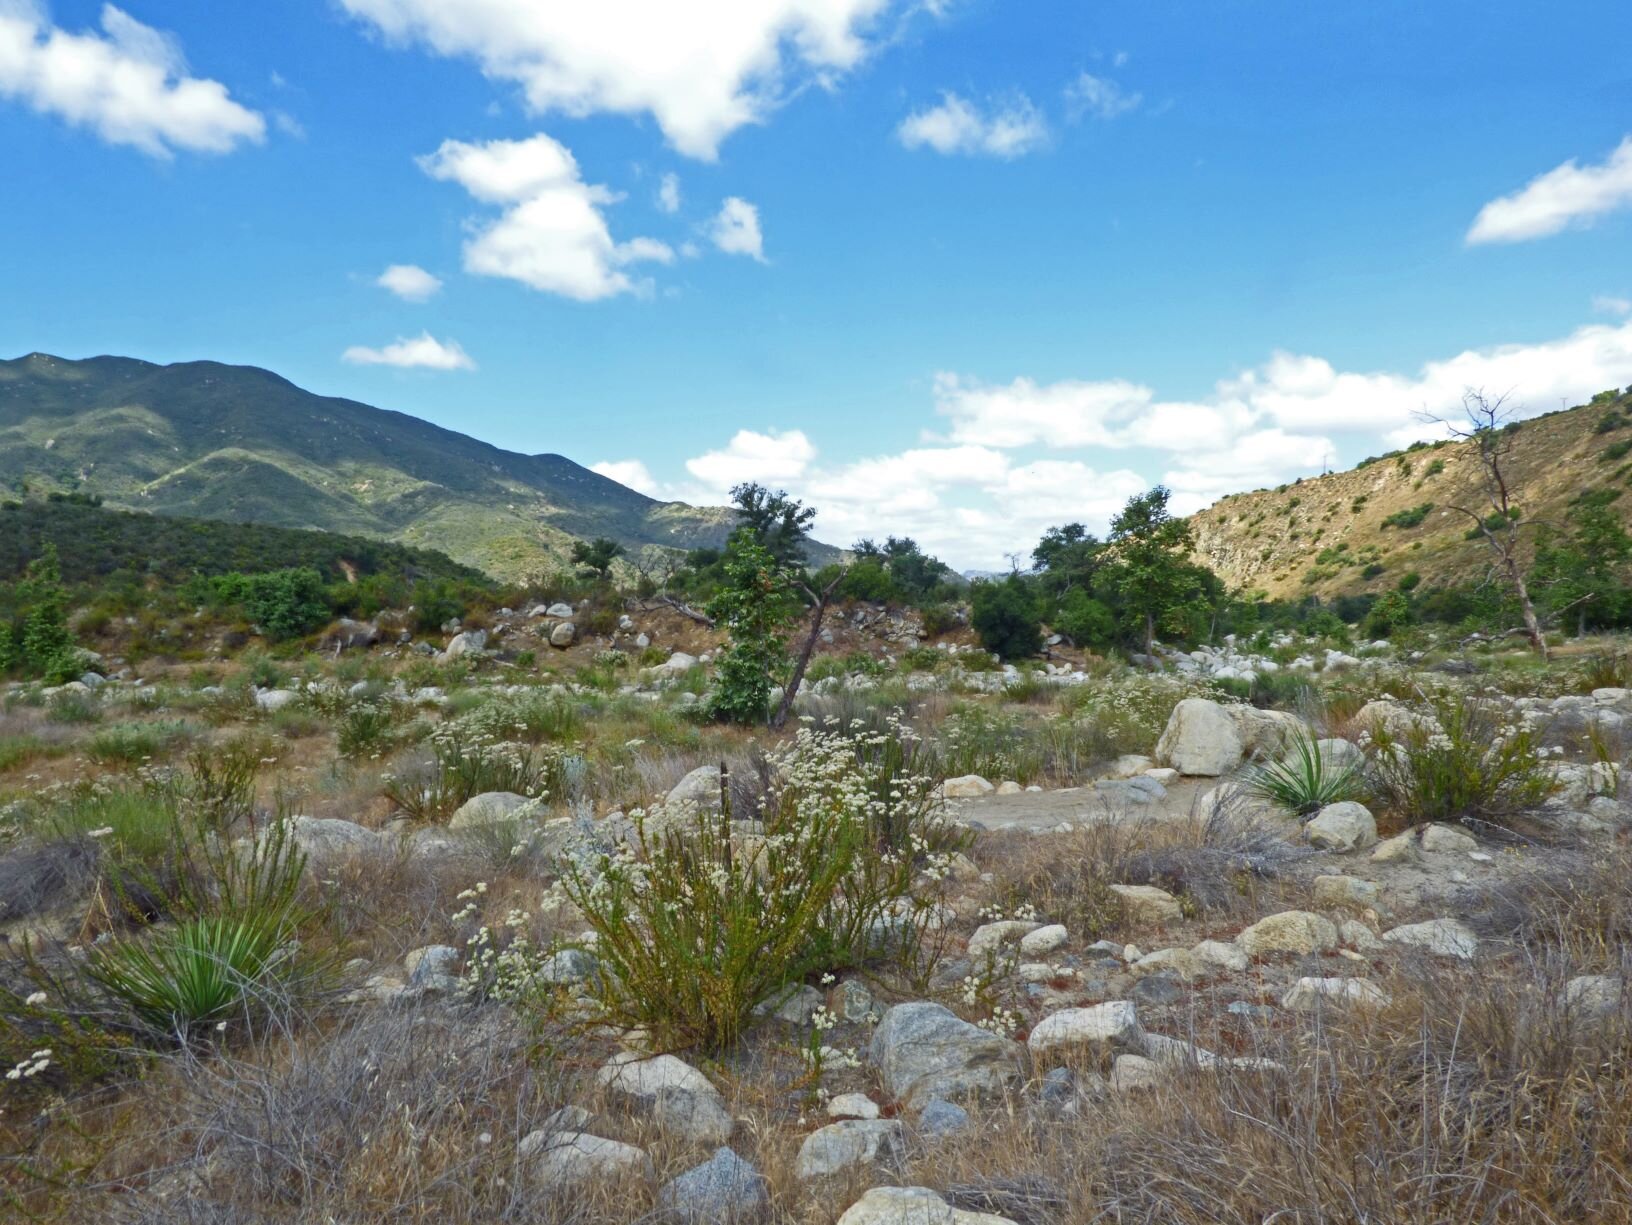  The San Luis Rey River was dry, but its rocky flood plain had lots of flowers